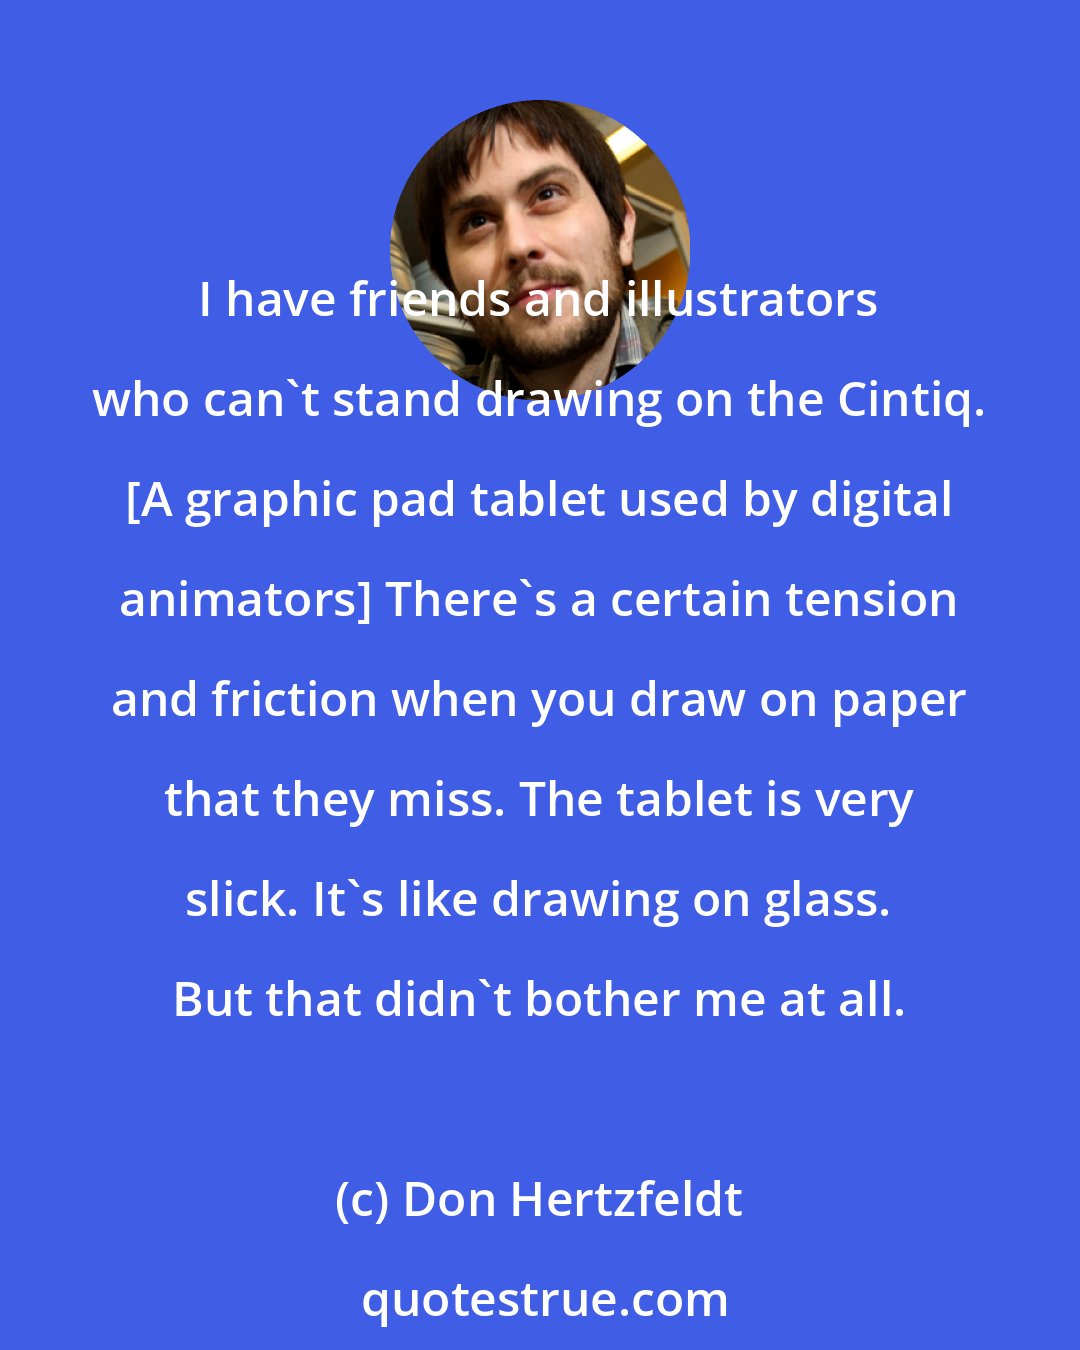 Don Hertzfeldt: I have friends and illustrators who can't stand drawing on the Cintiq. [A graphic pad tablet used by digital animators] There's a certain tension and friction when you draw on paper that they miss. The tablet is very slick. It's like drawing on glass. But that didn't bother me at all.